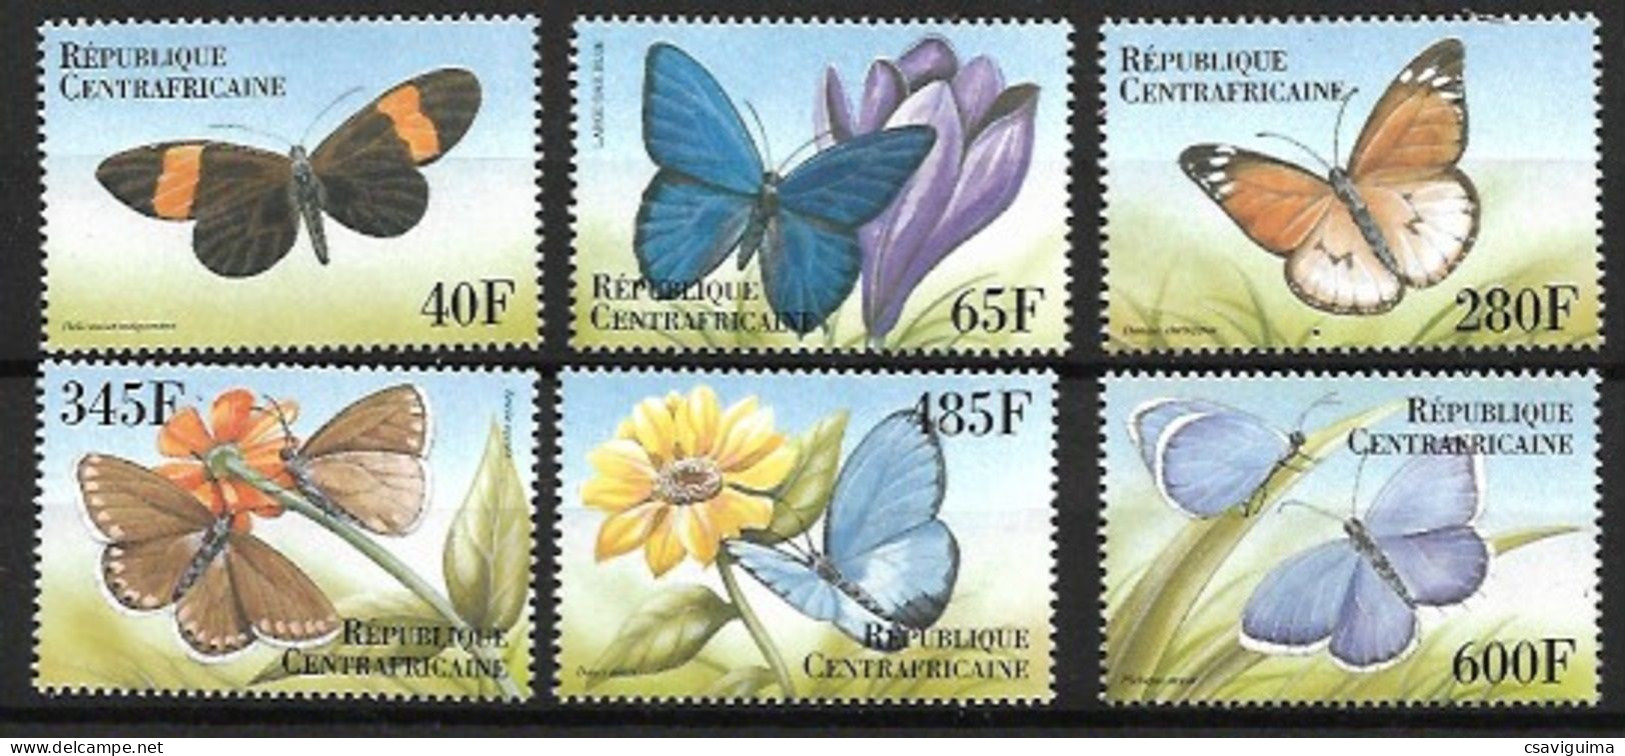 Central Africa Rep. (Centrafricaine) - 2000 - Butterflies - Yv 1618CS/CY - Vlinders